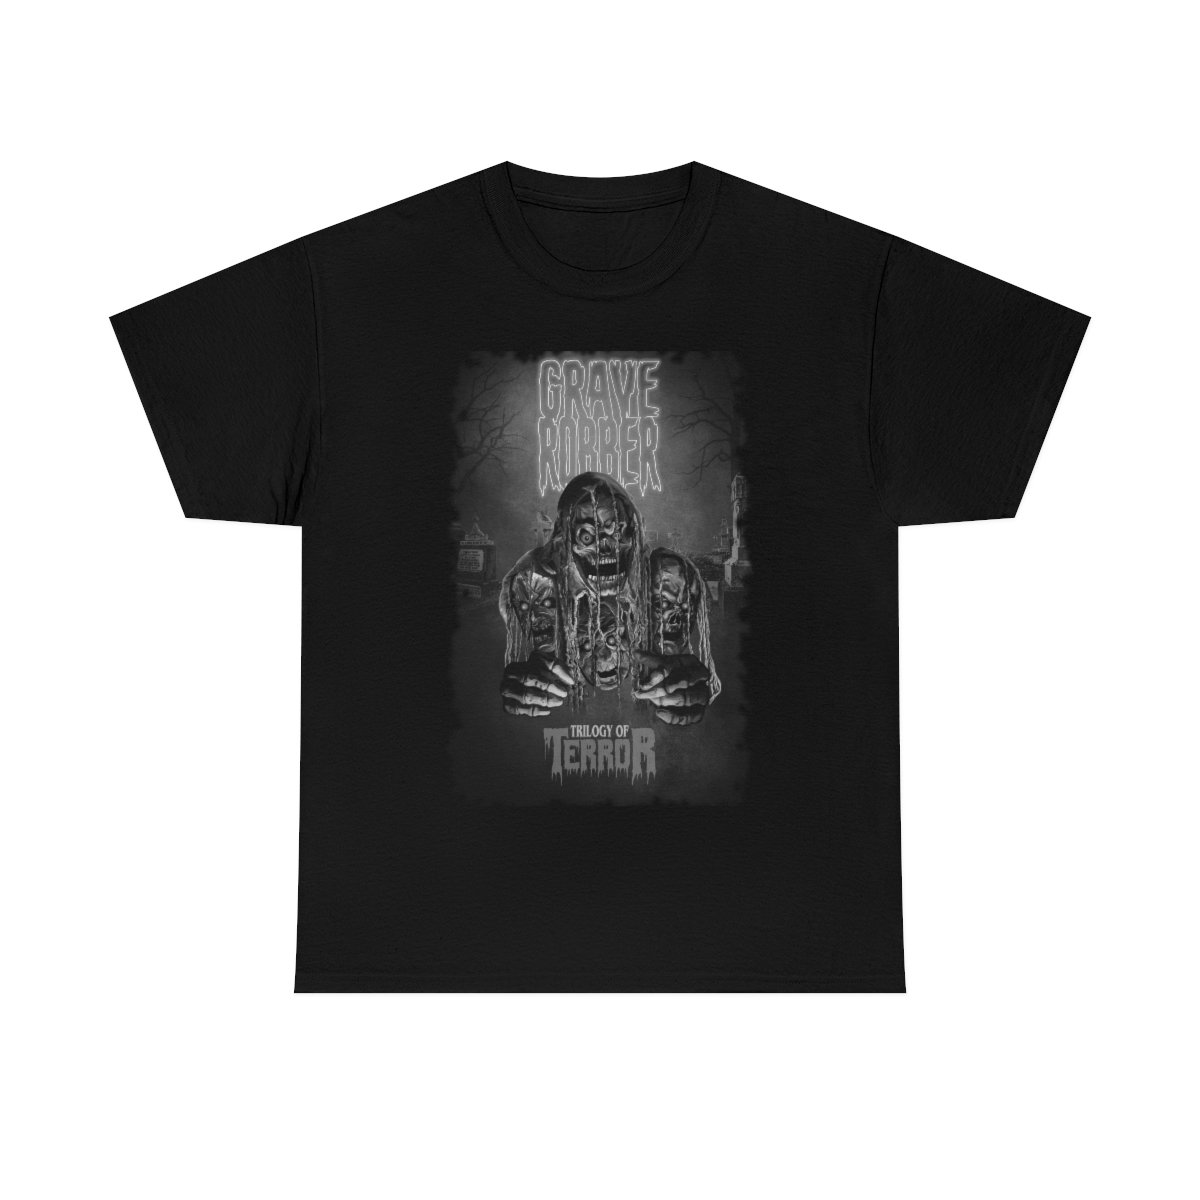 Grave Robber Trilogy of Terror (Limited Edition Black and White) Short Sleeve Tshirt (5000)